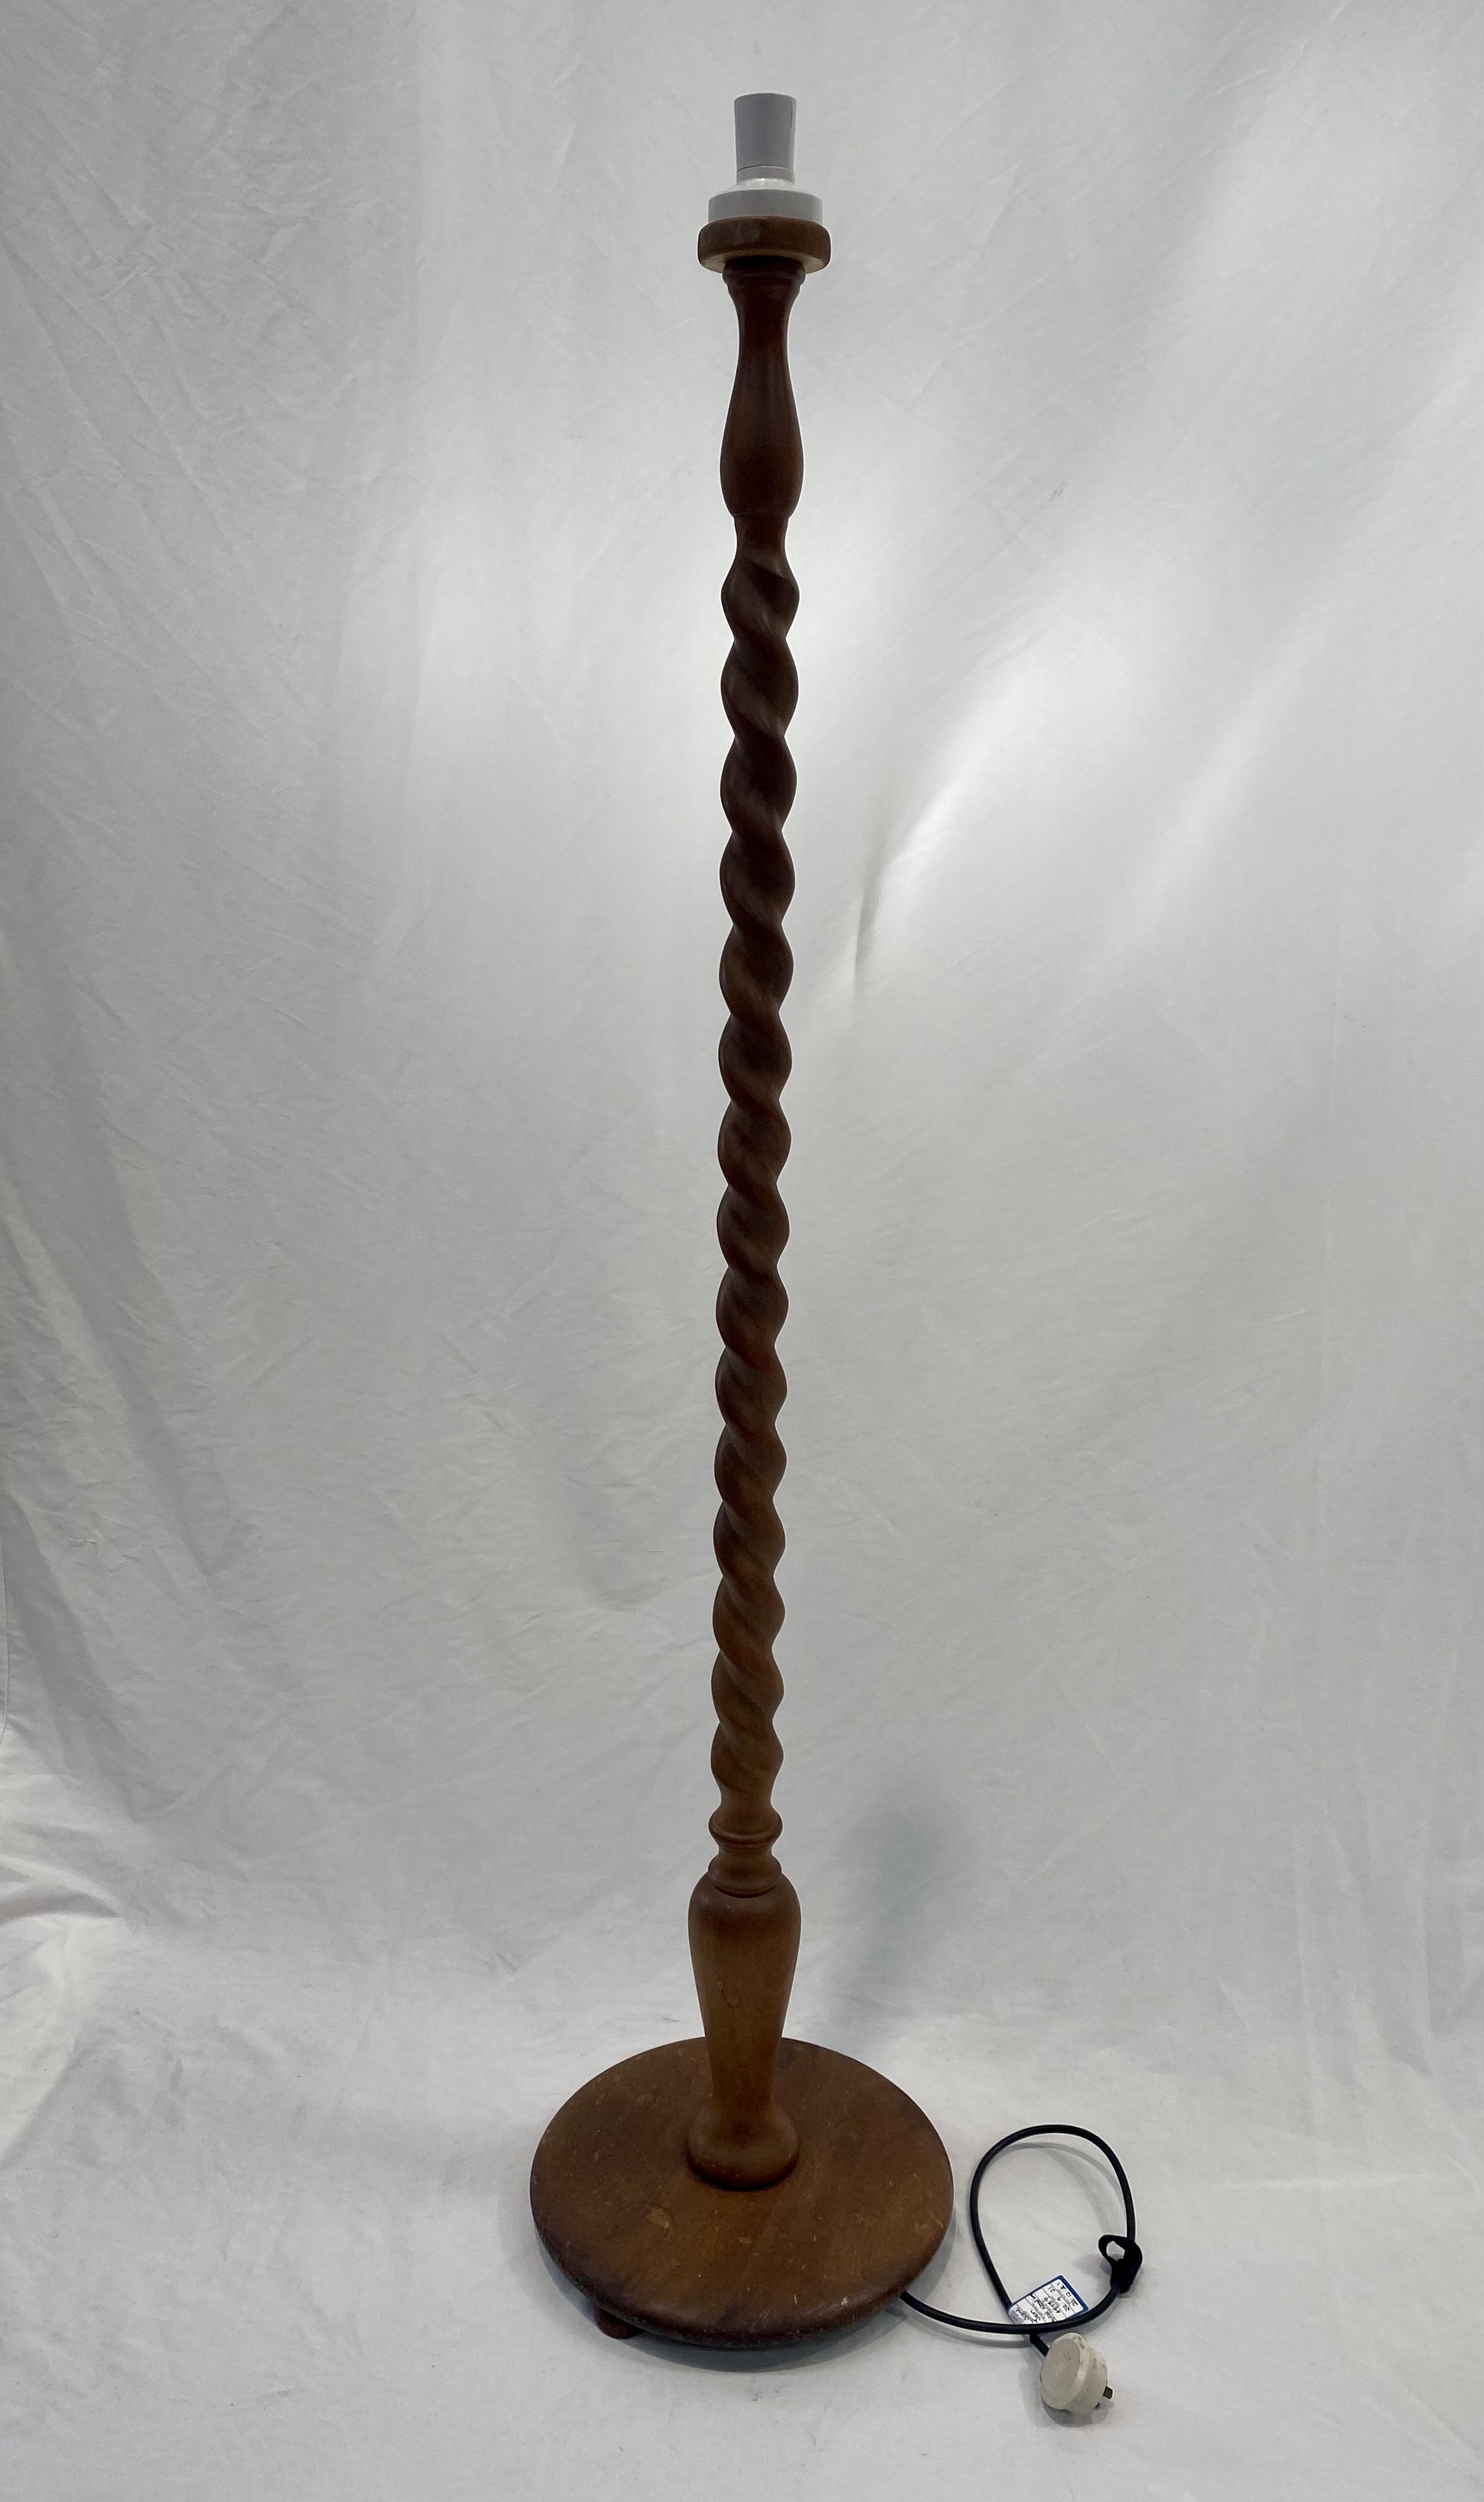 Standing Lamp #5 Twisted Wooden (Working) w/ Shade (H: 1.46m)